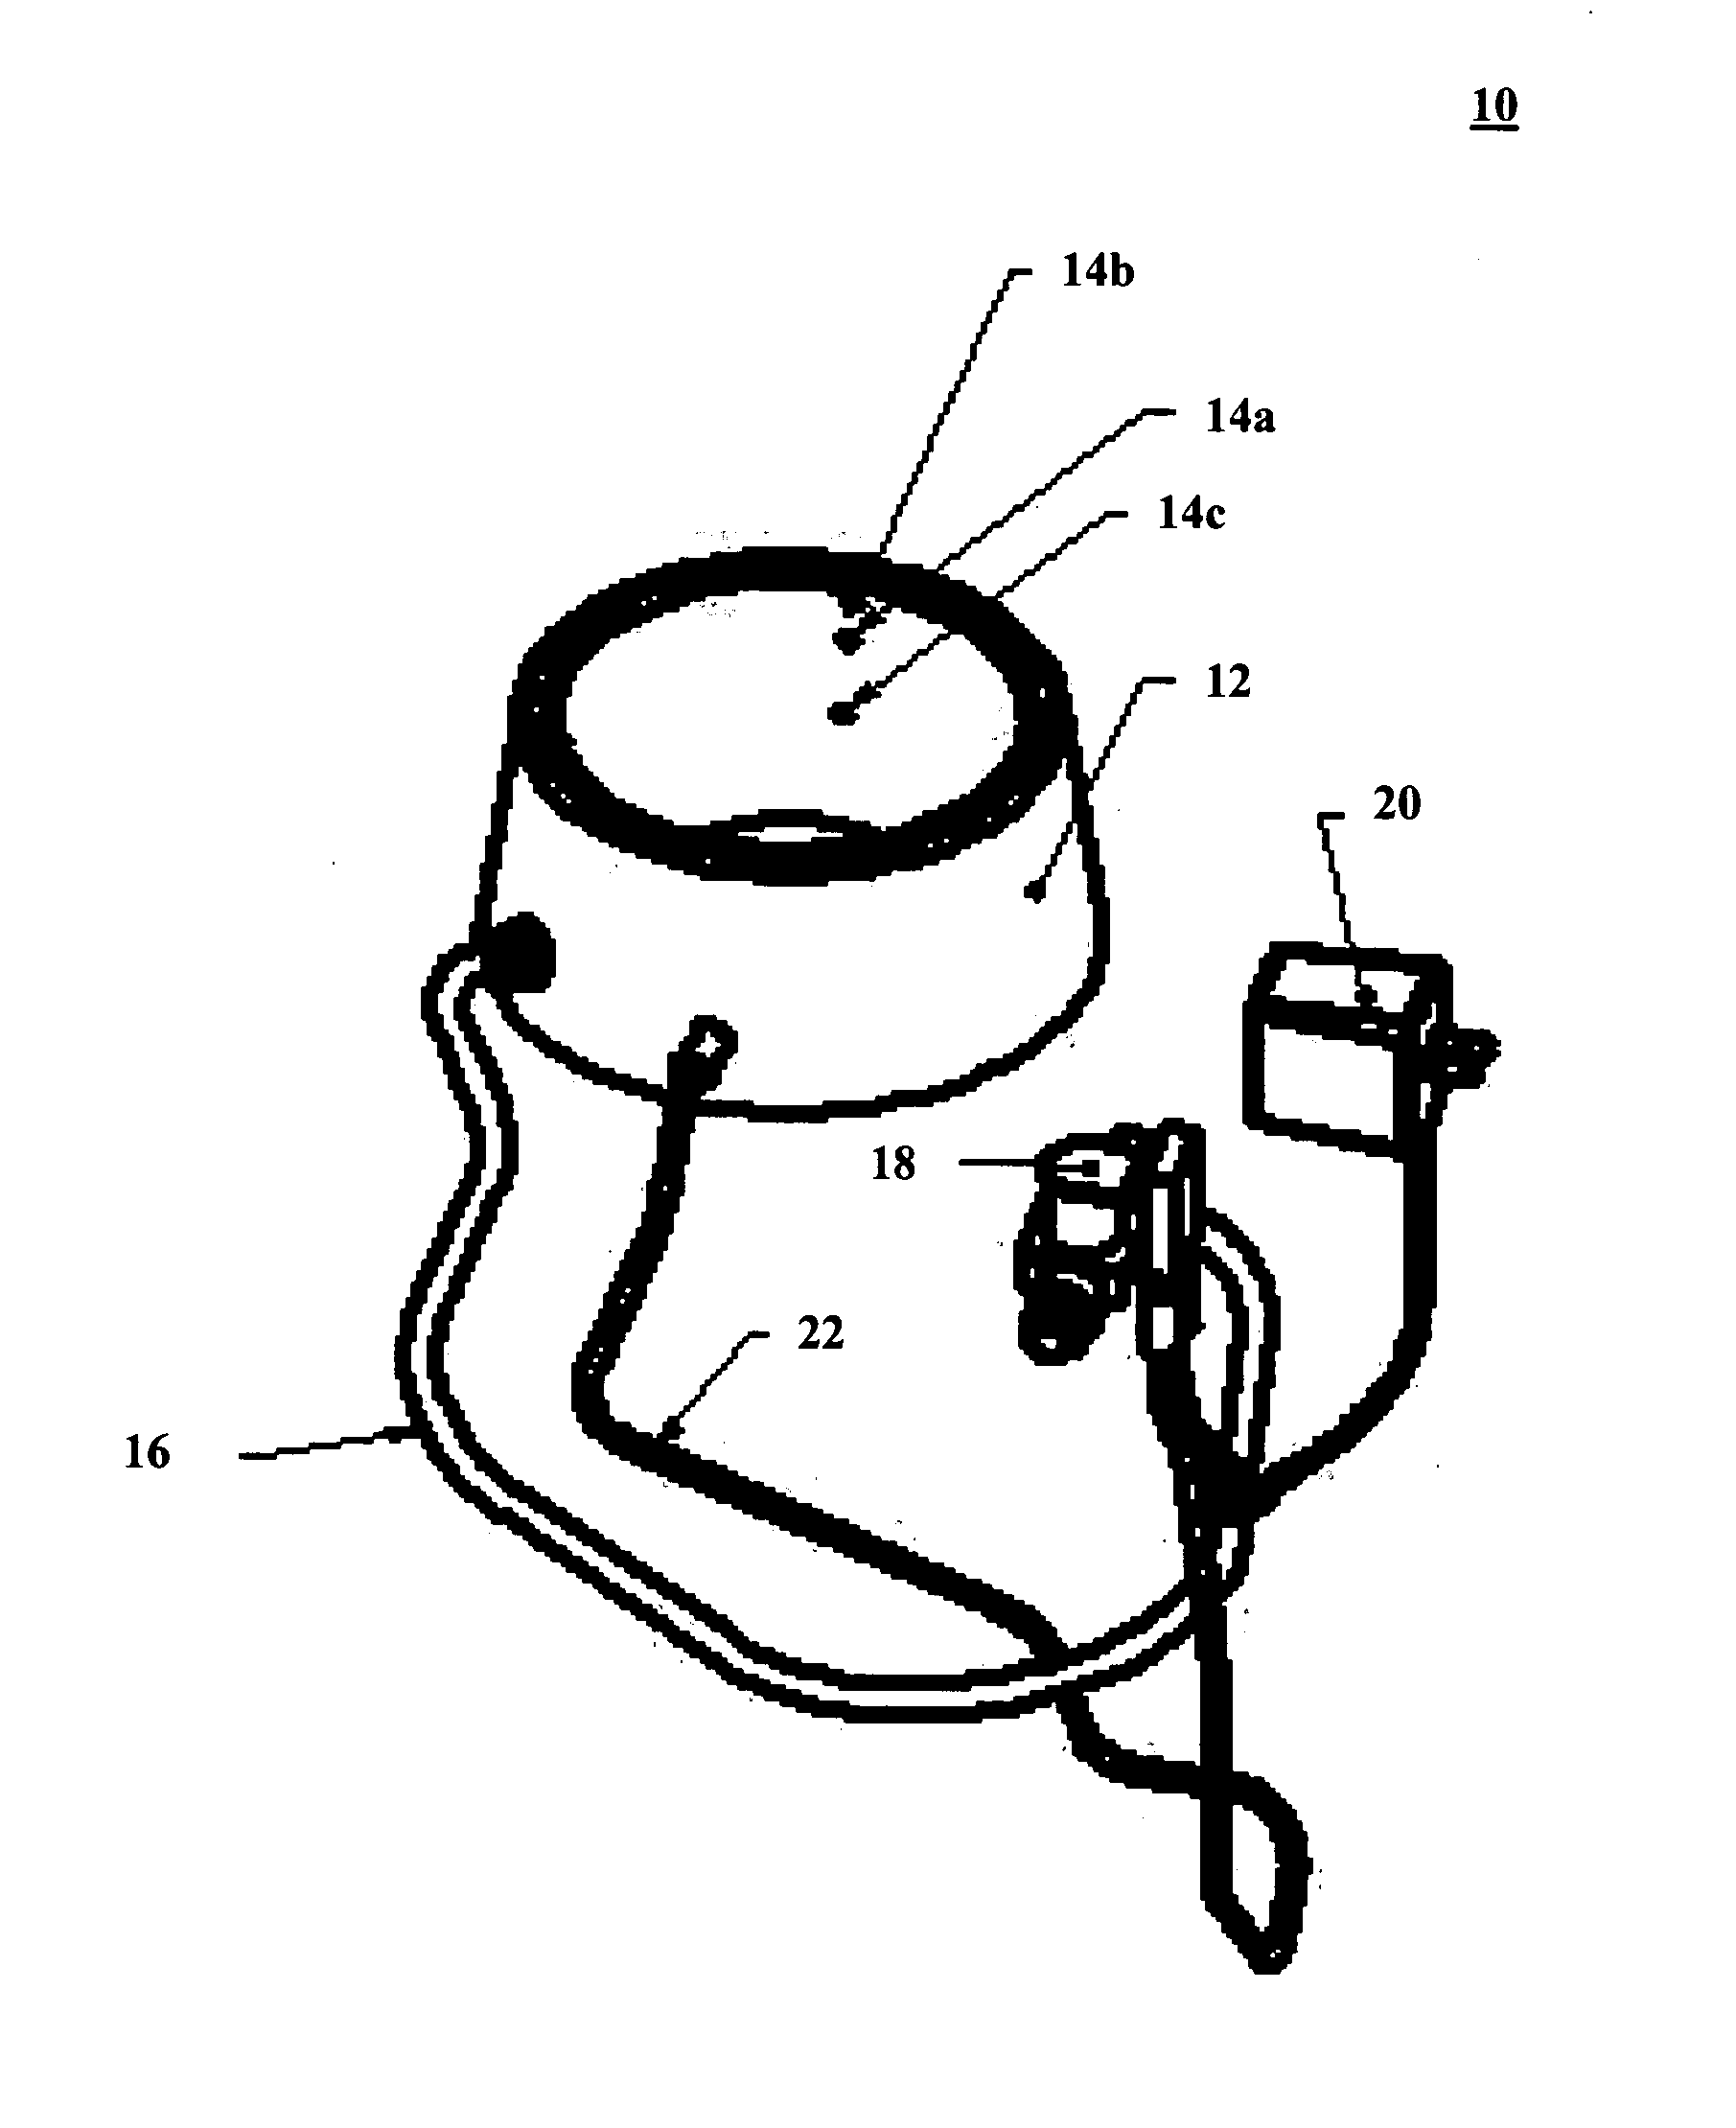 Automatic smart watering apparatus